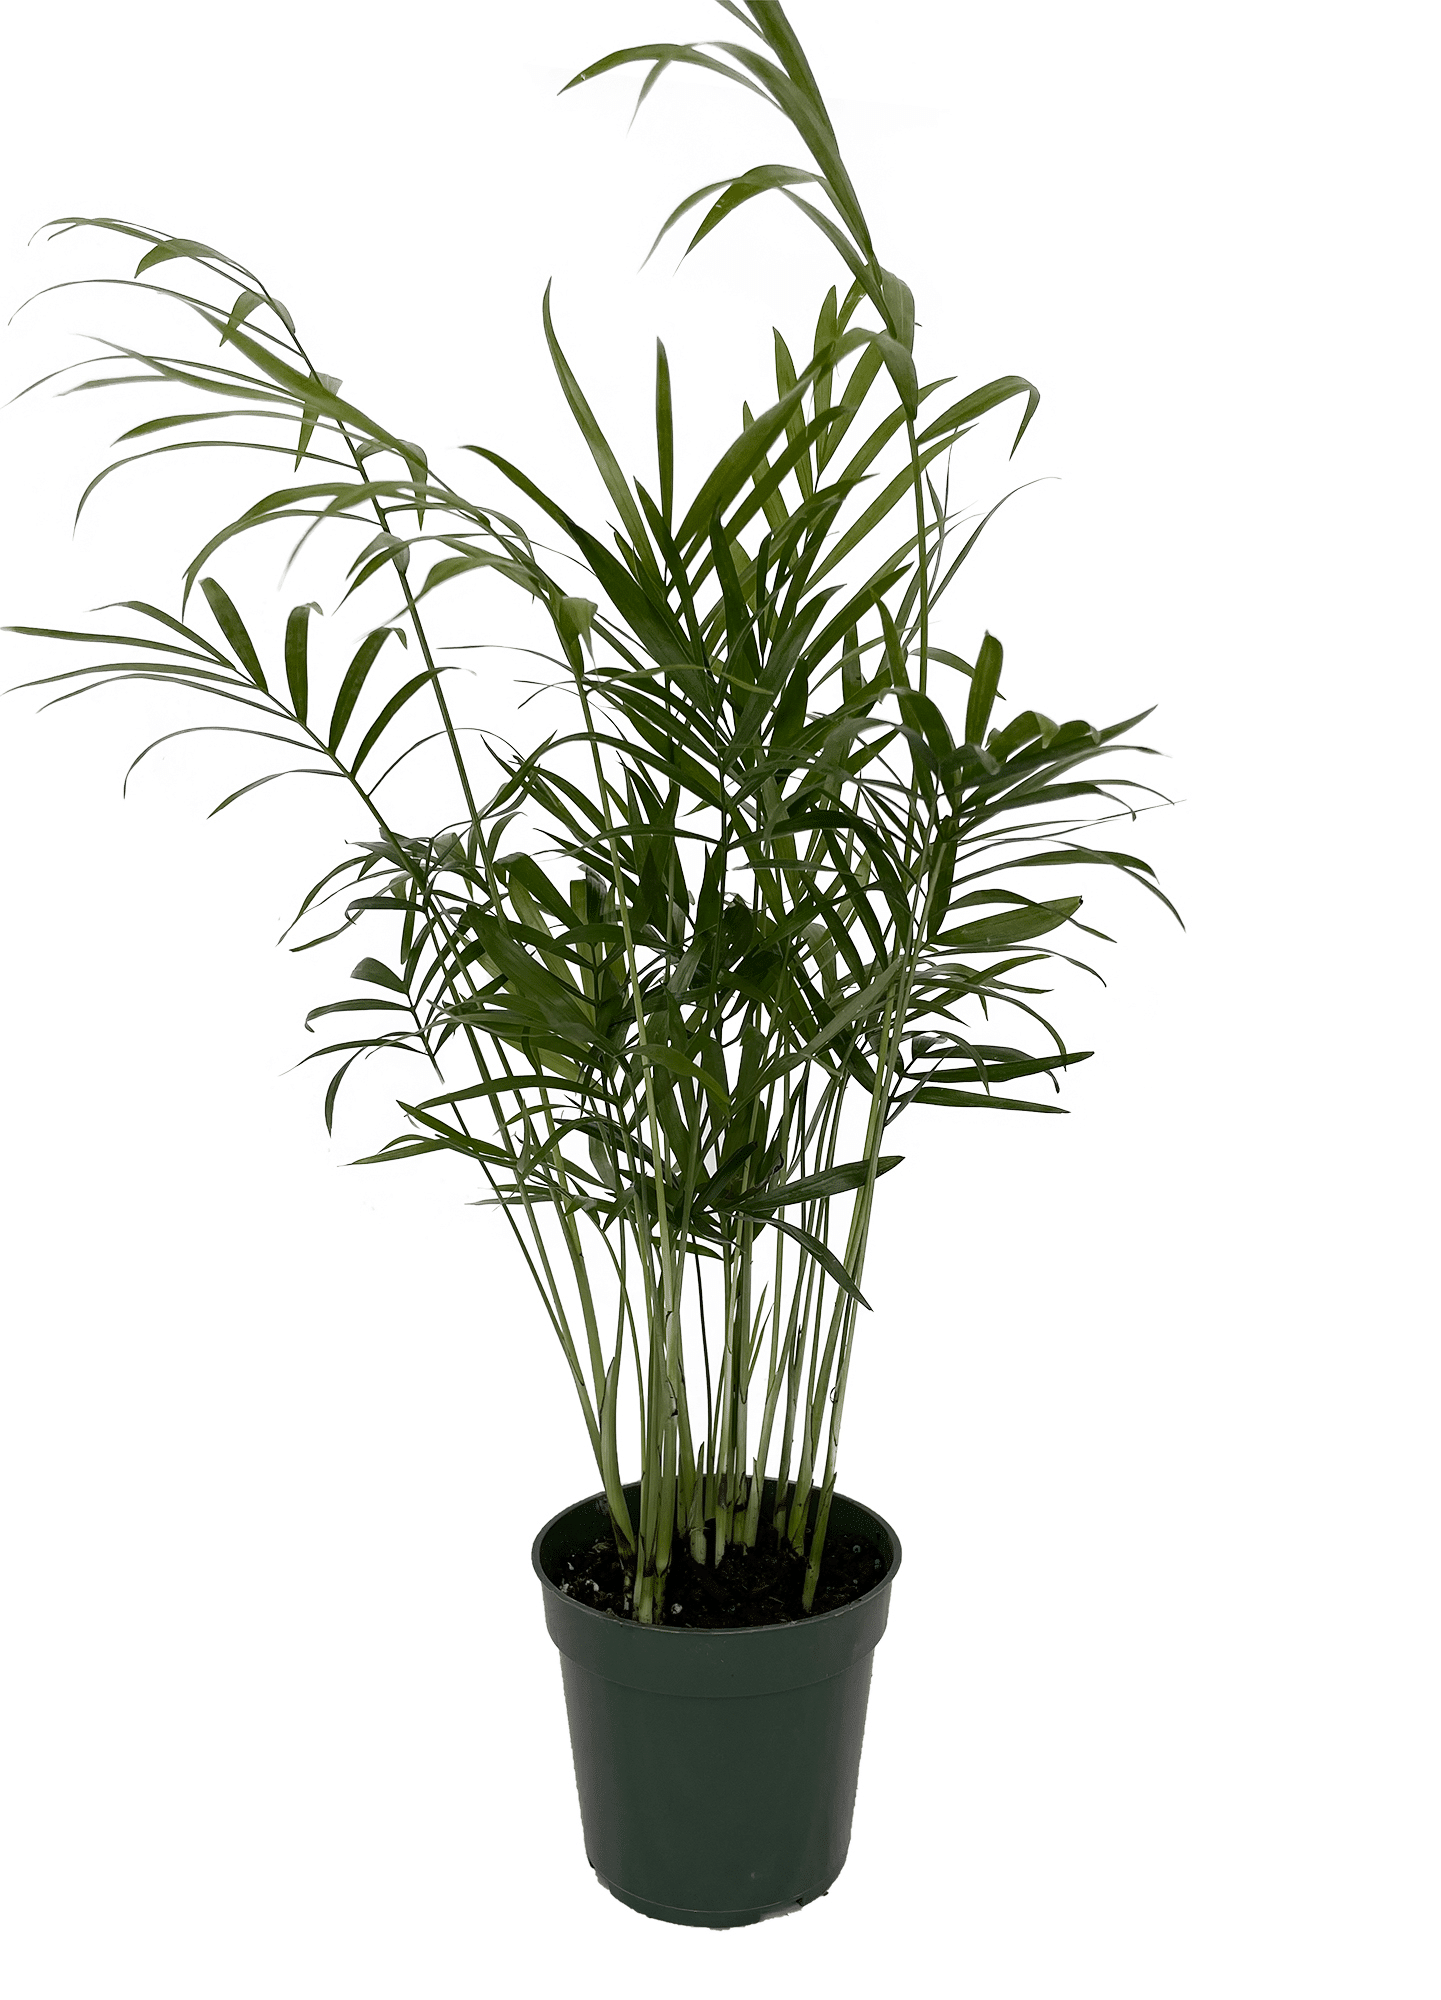 A parlor palm in low light conditions